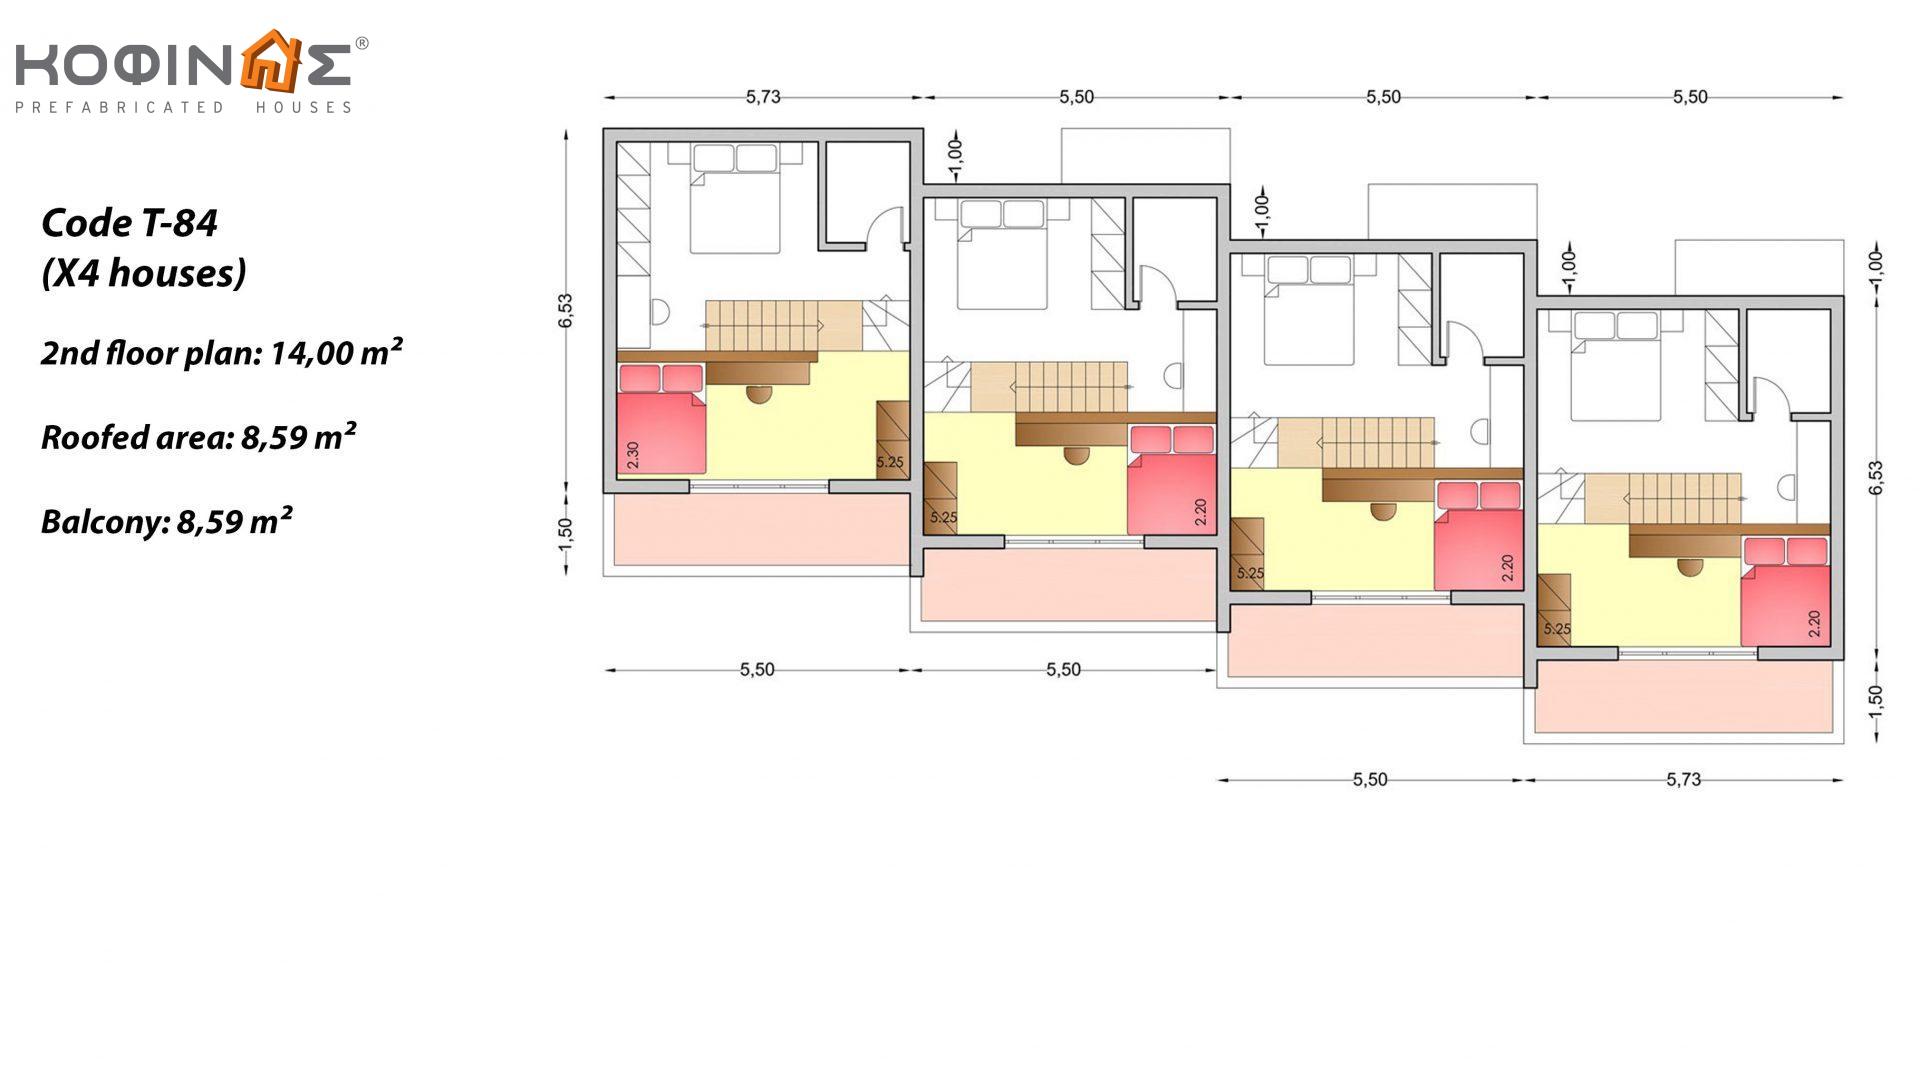 3-story house T-84, total surface of 84,17 m² ,covered areas 43.36 m²,balcony 34.36 m²